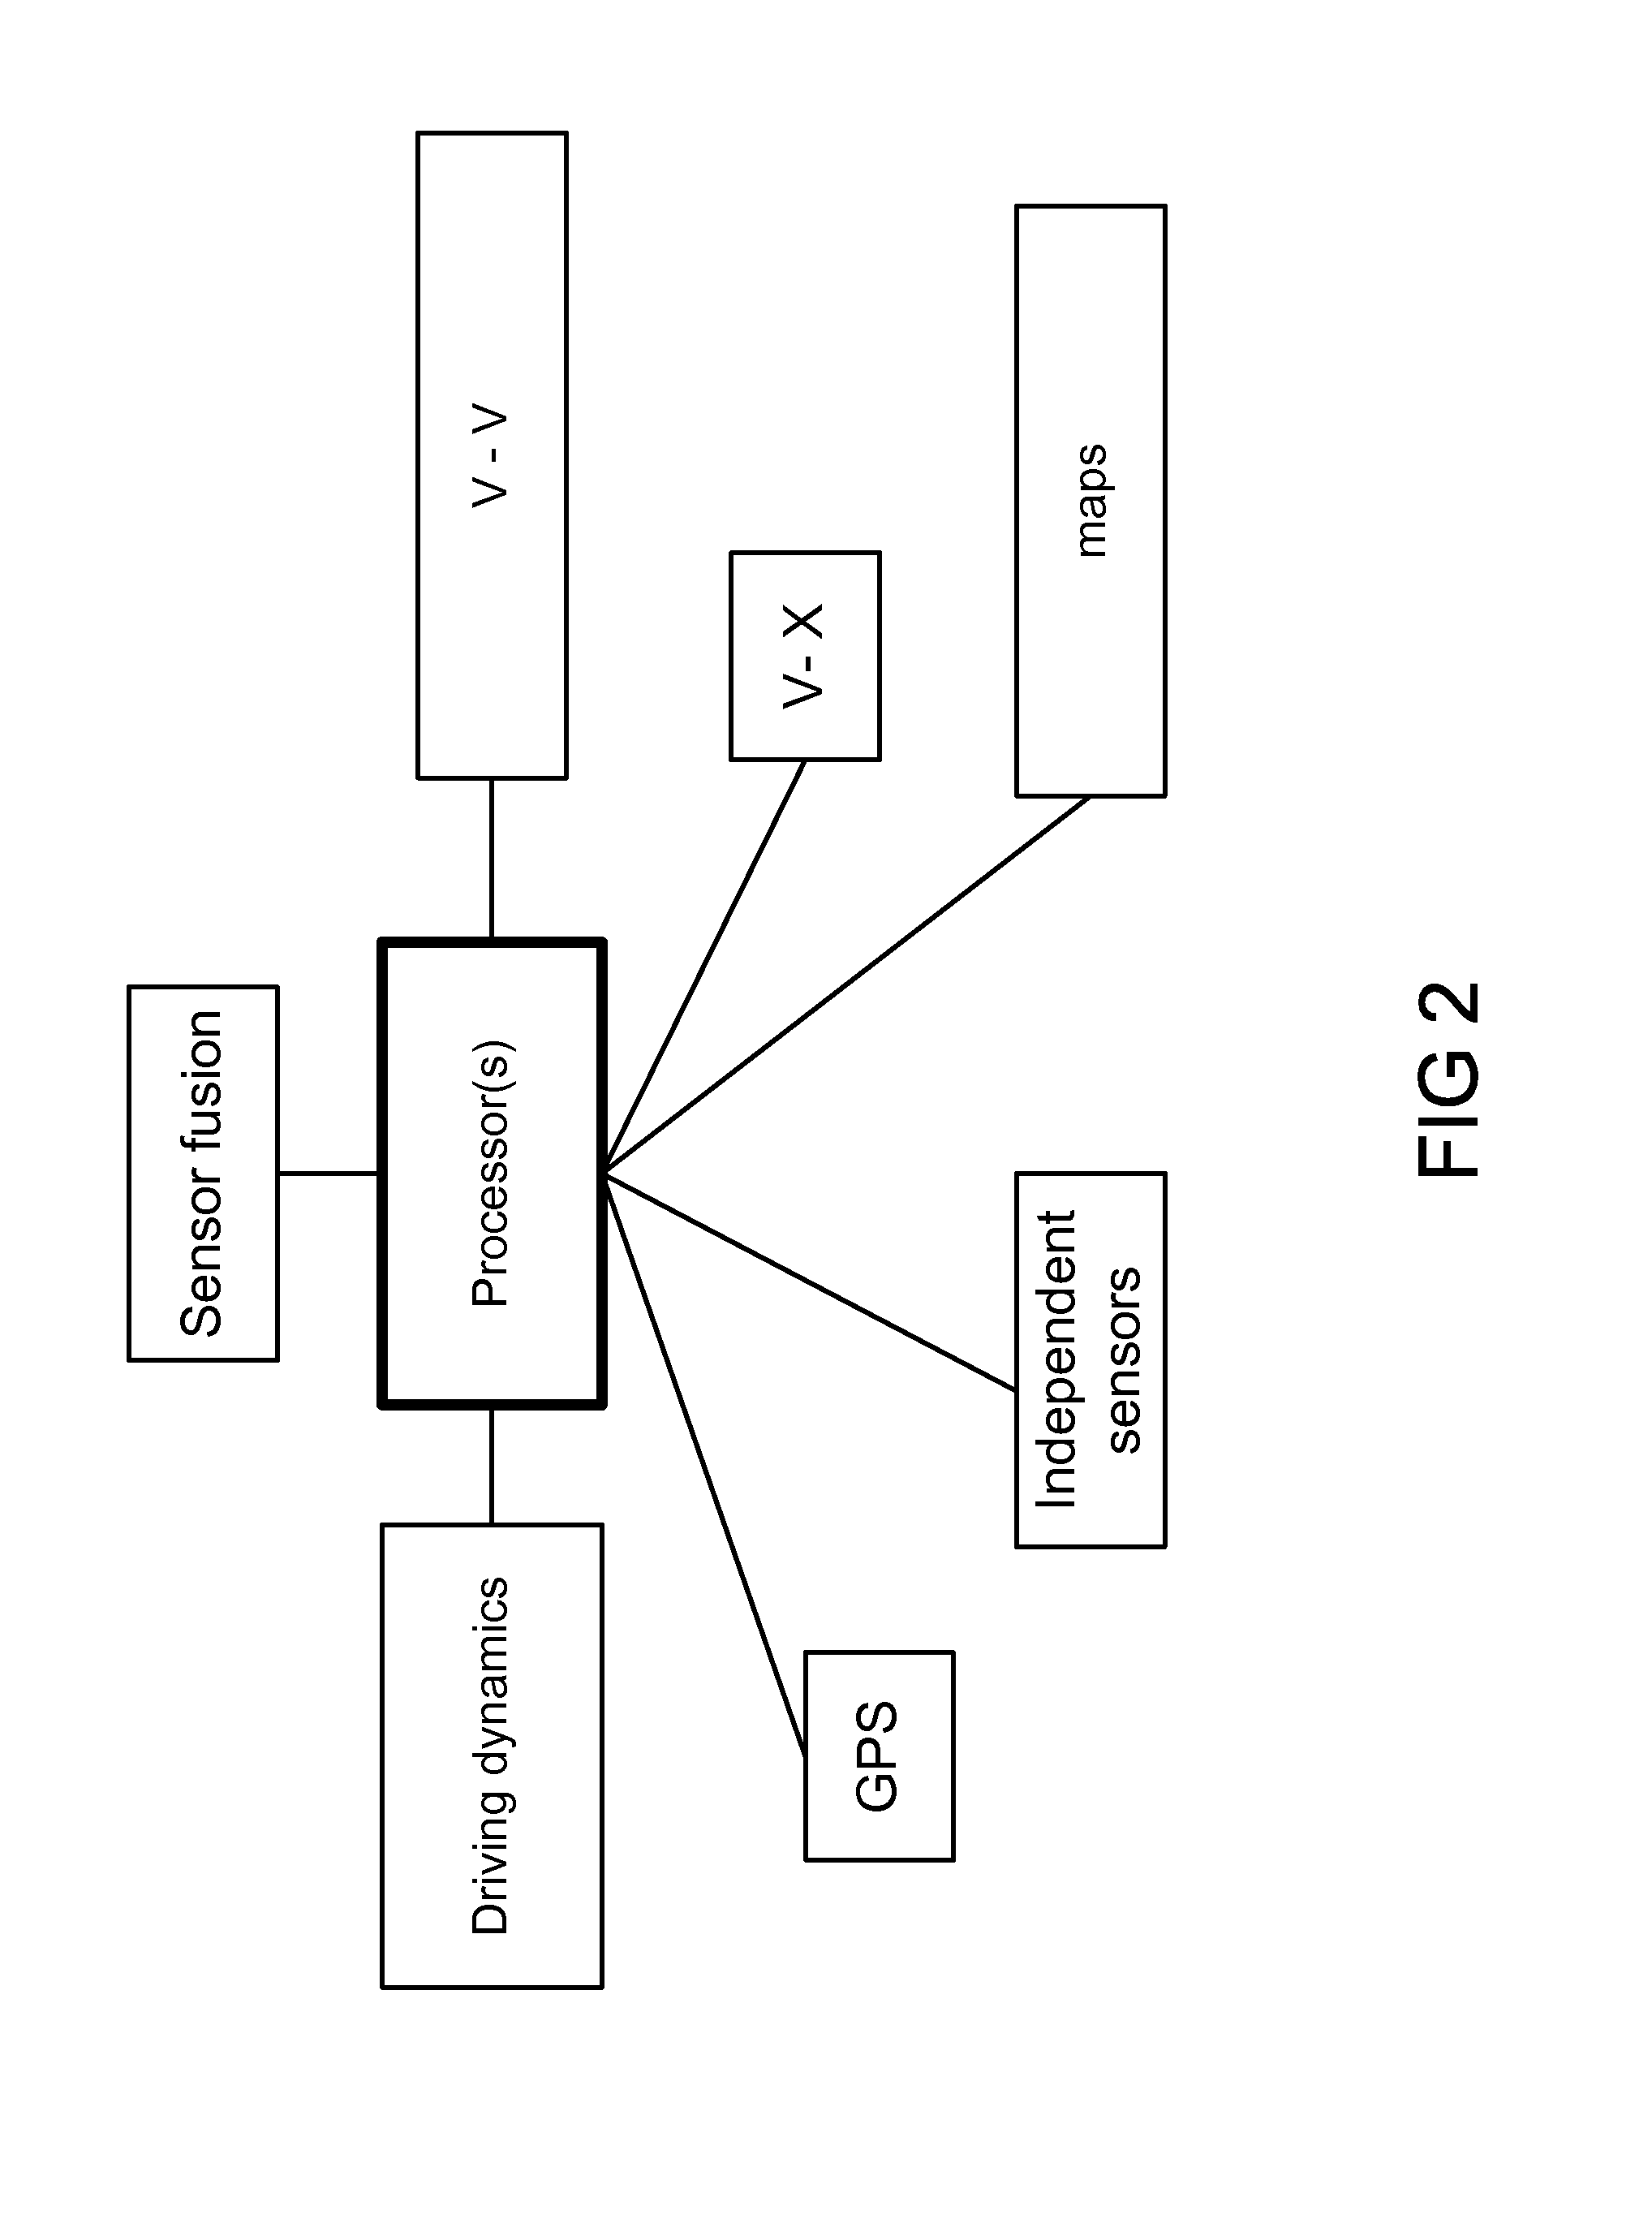 System and method for road side equipment of interest selection for active safety applications